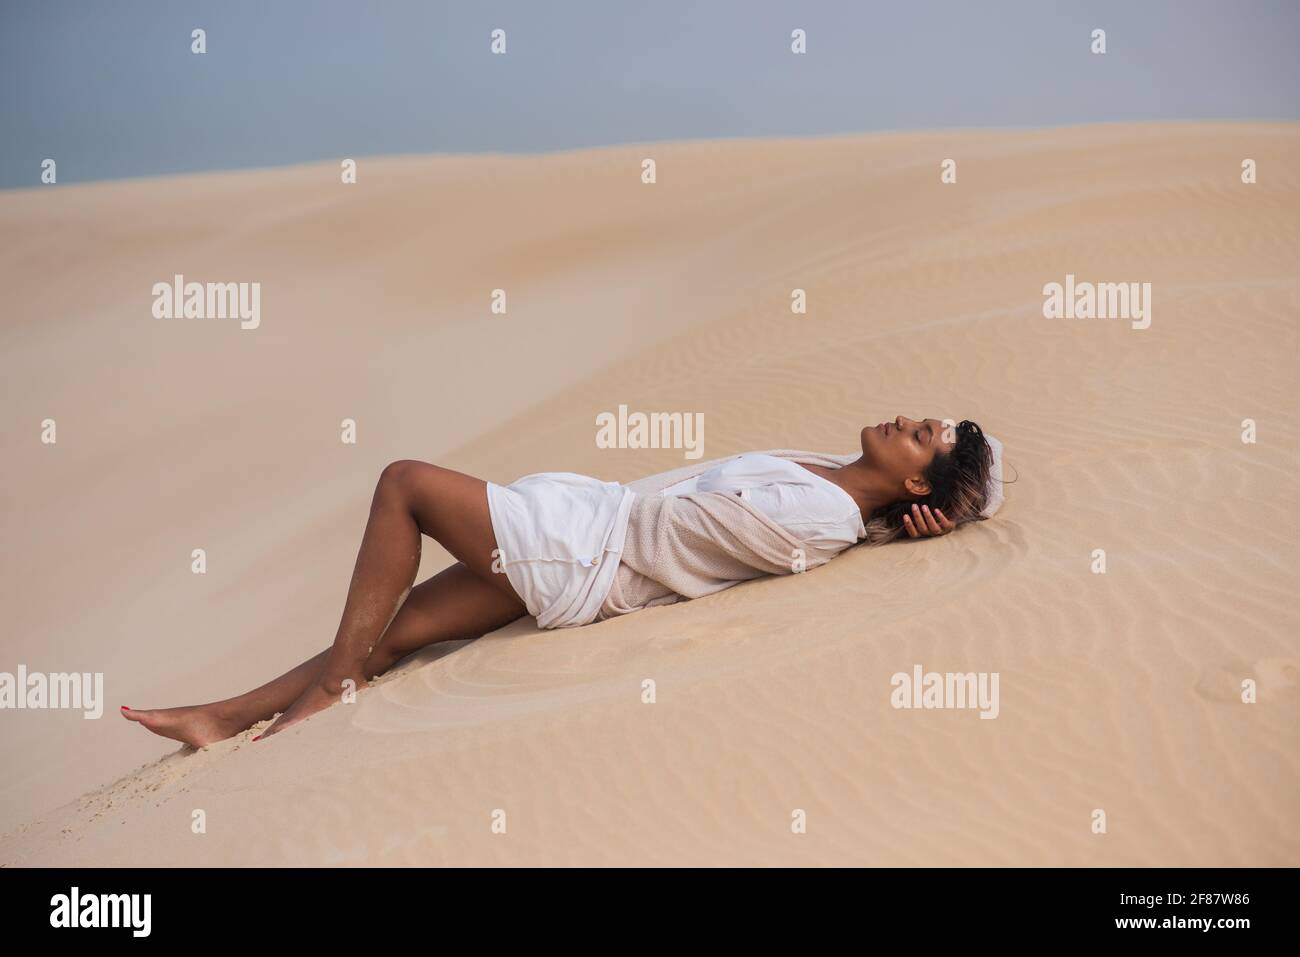 Beautiful woman laying on sand dunes and catching a tan Stock Photo